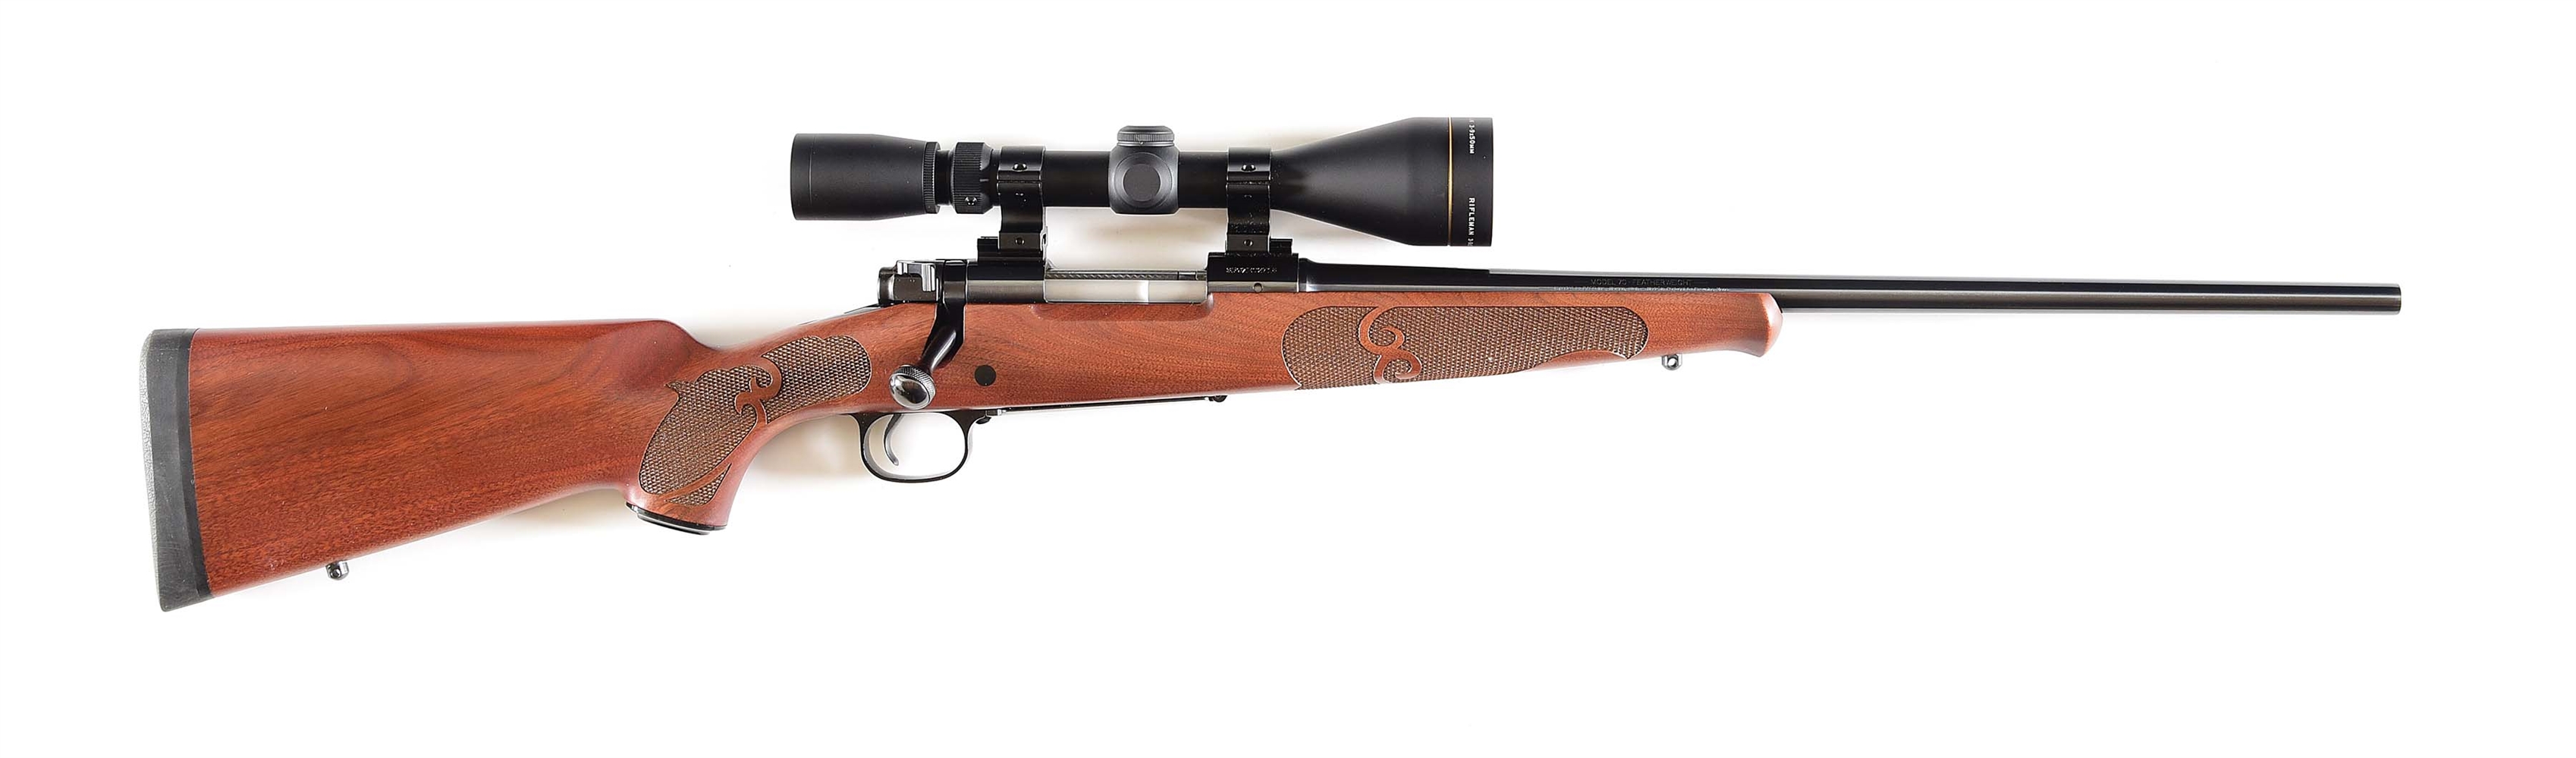 (M) WINCHESTER MODEL 70 FEATHERWEIGHT COMPACT BOLT ACTION RIFLE.